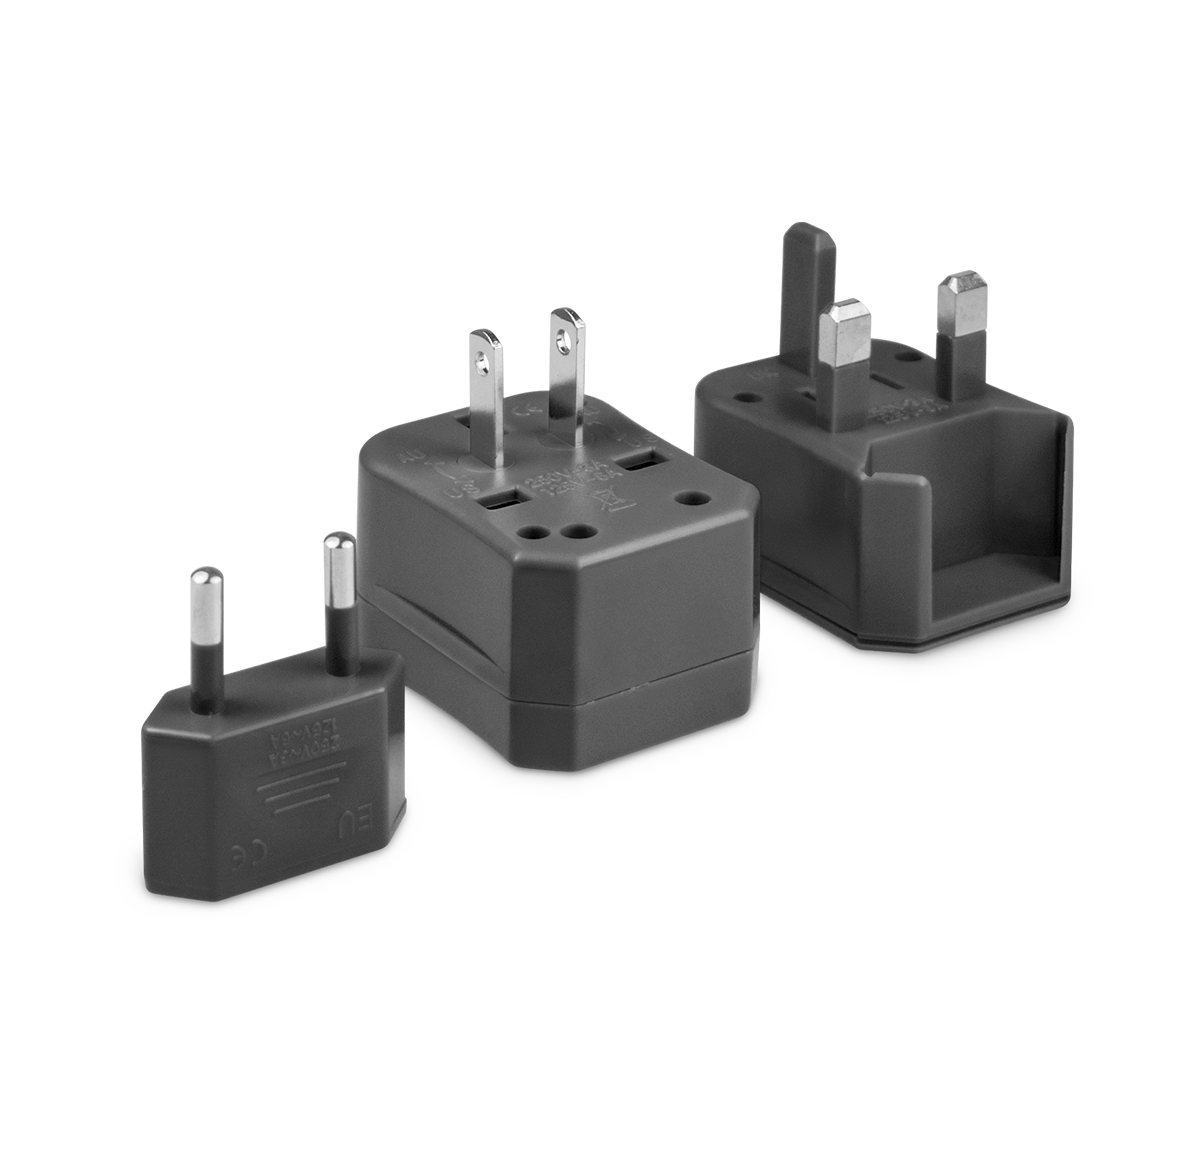 Three pieces of the universal travel adapter. This travel plug adapter is Black. The World Traveler Travel Adapter is the perfect compact travel adapter to charge your tech on-the-go.